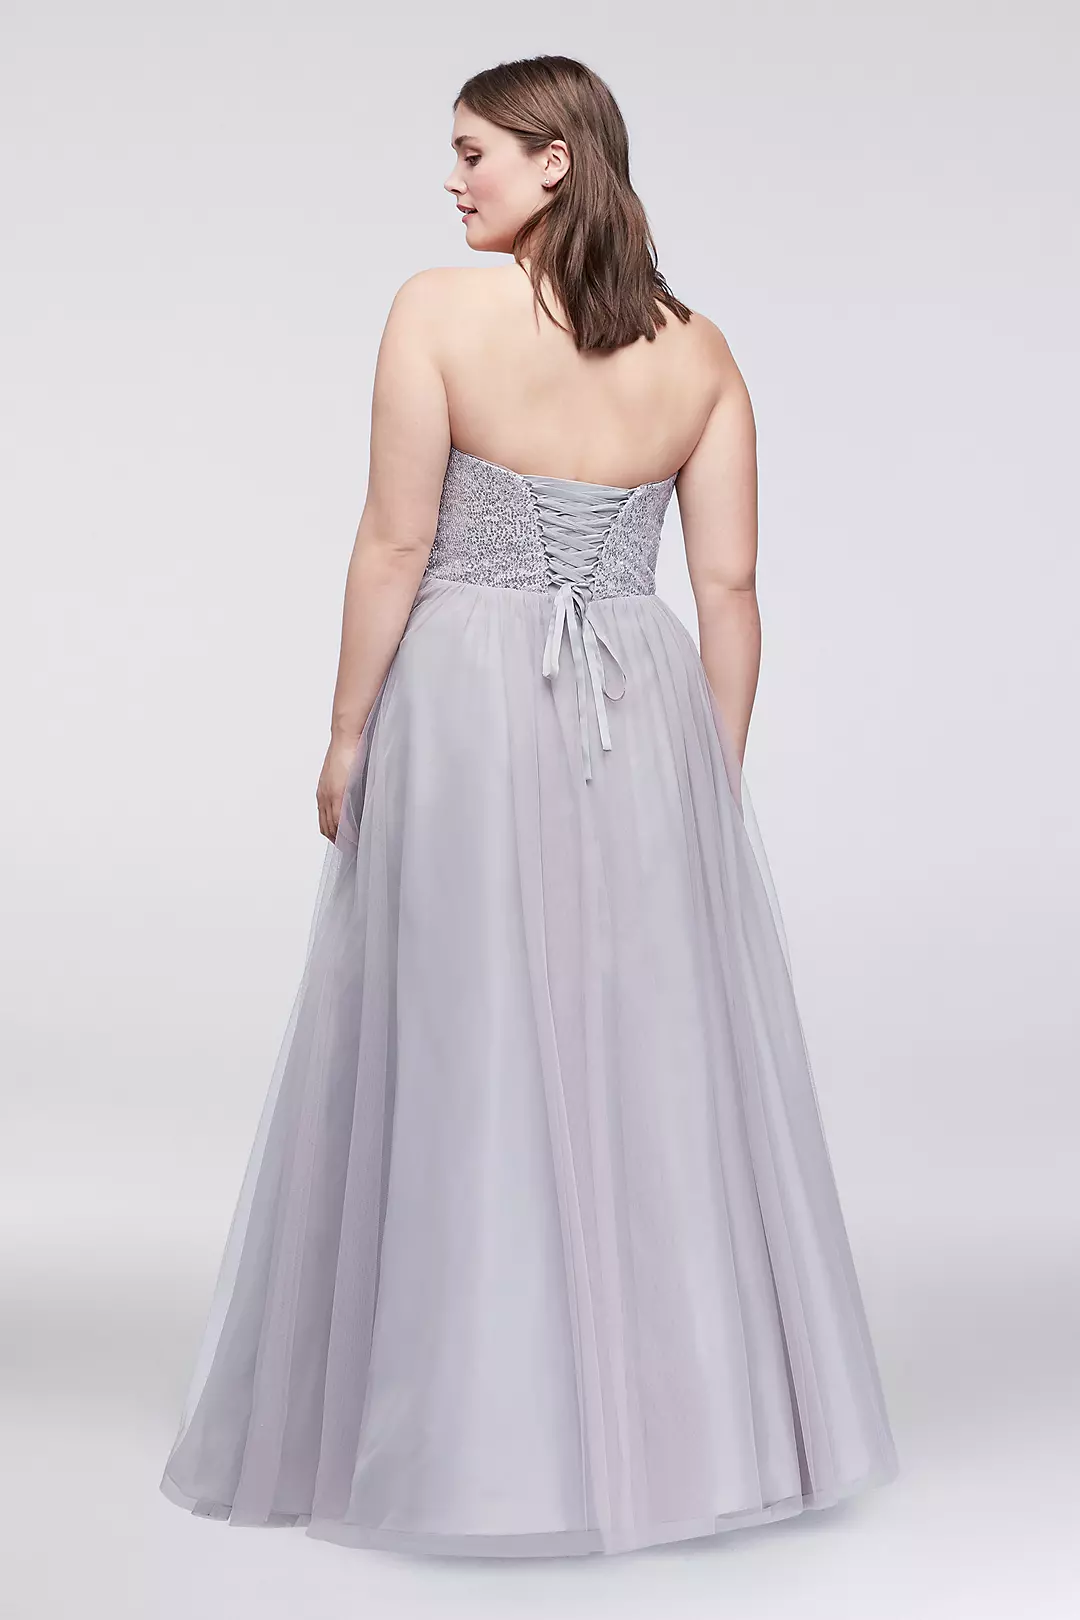 Crystal Beaded Strapless Ball Gown Image 2